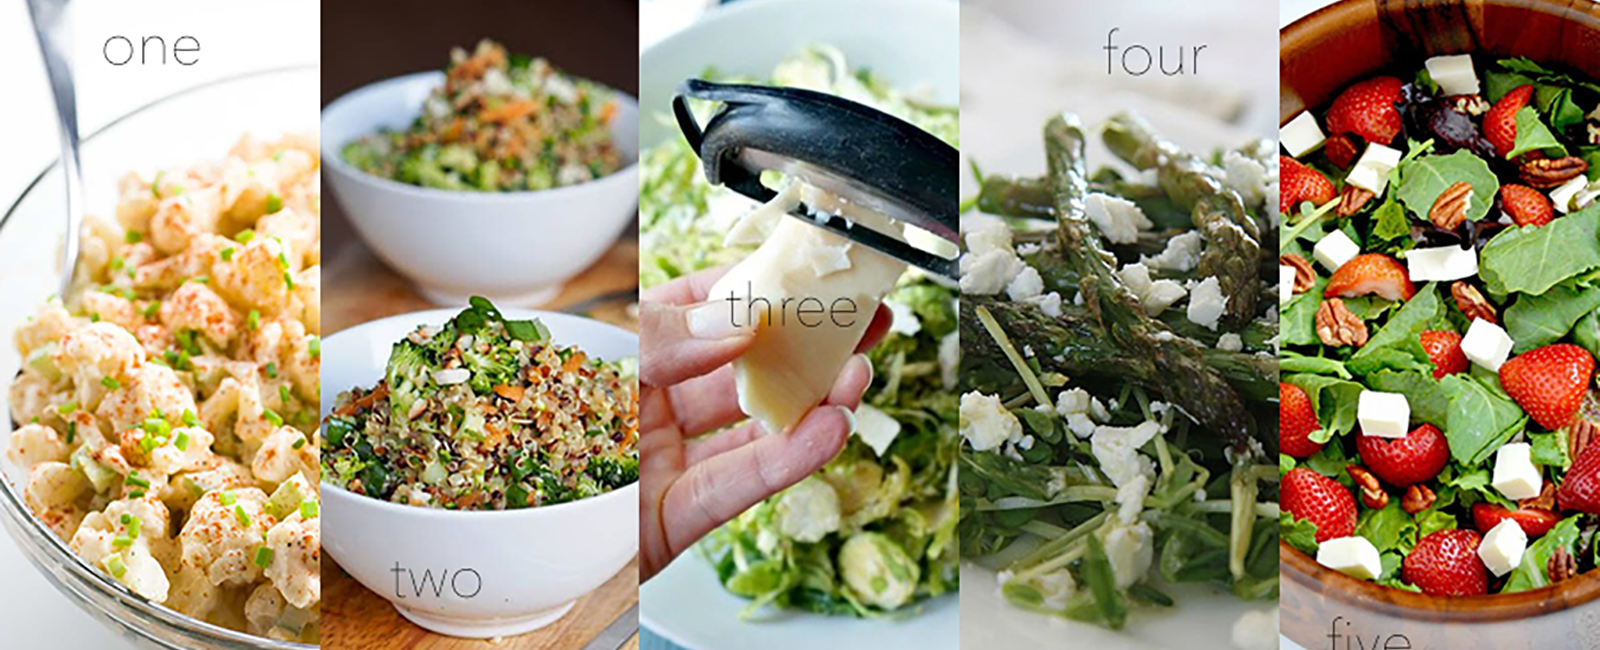 5 Delicious Salads for Your New Year’s Resolution